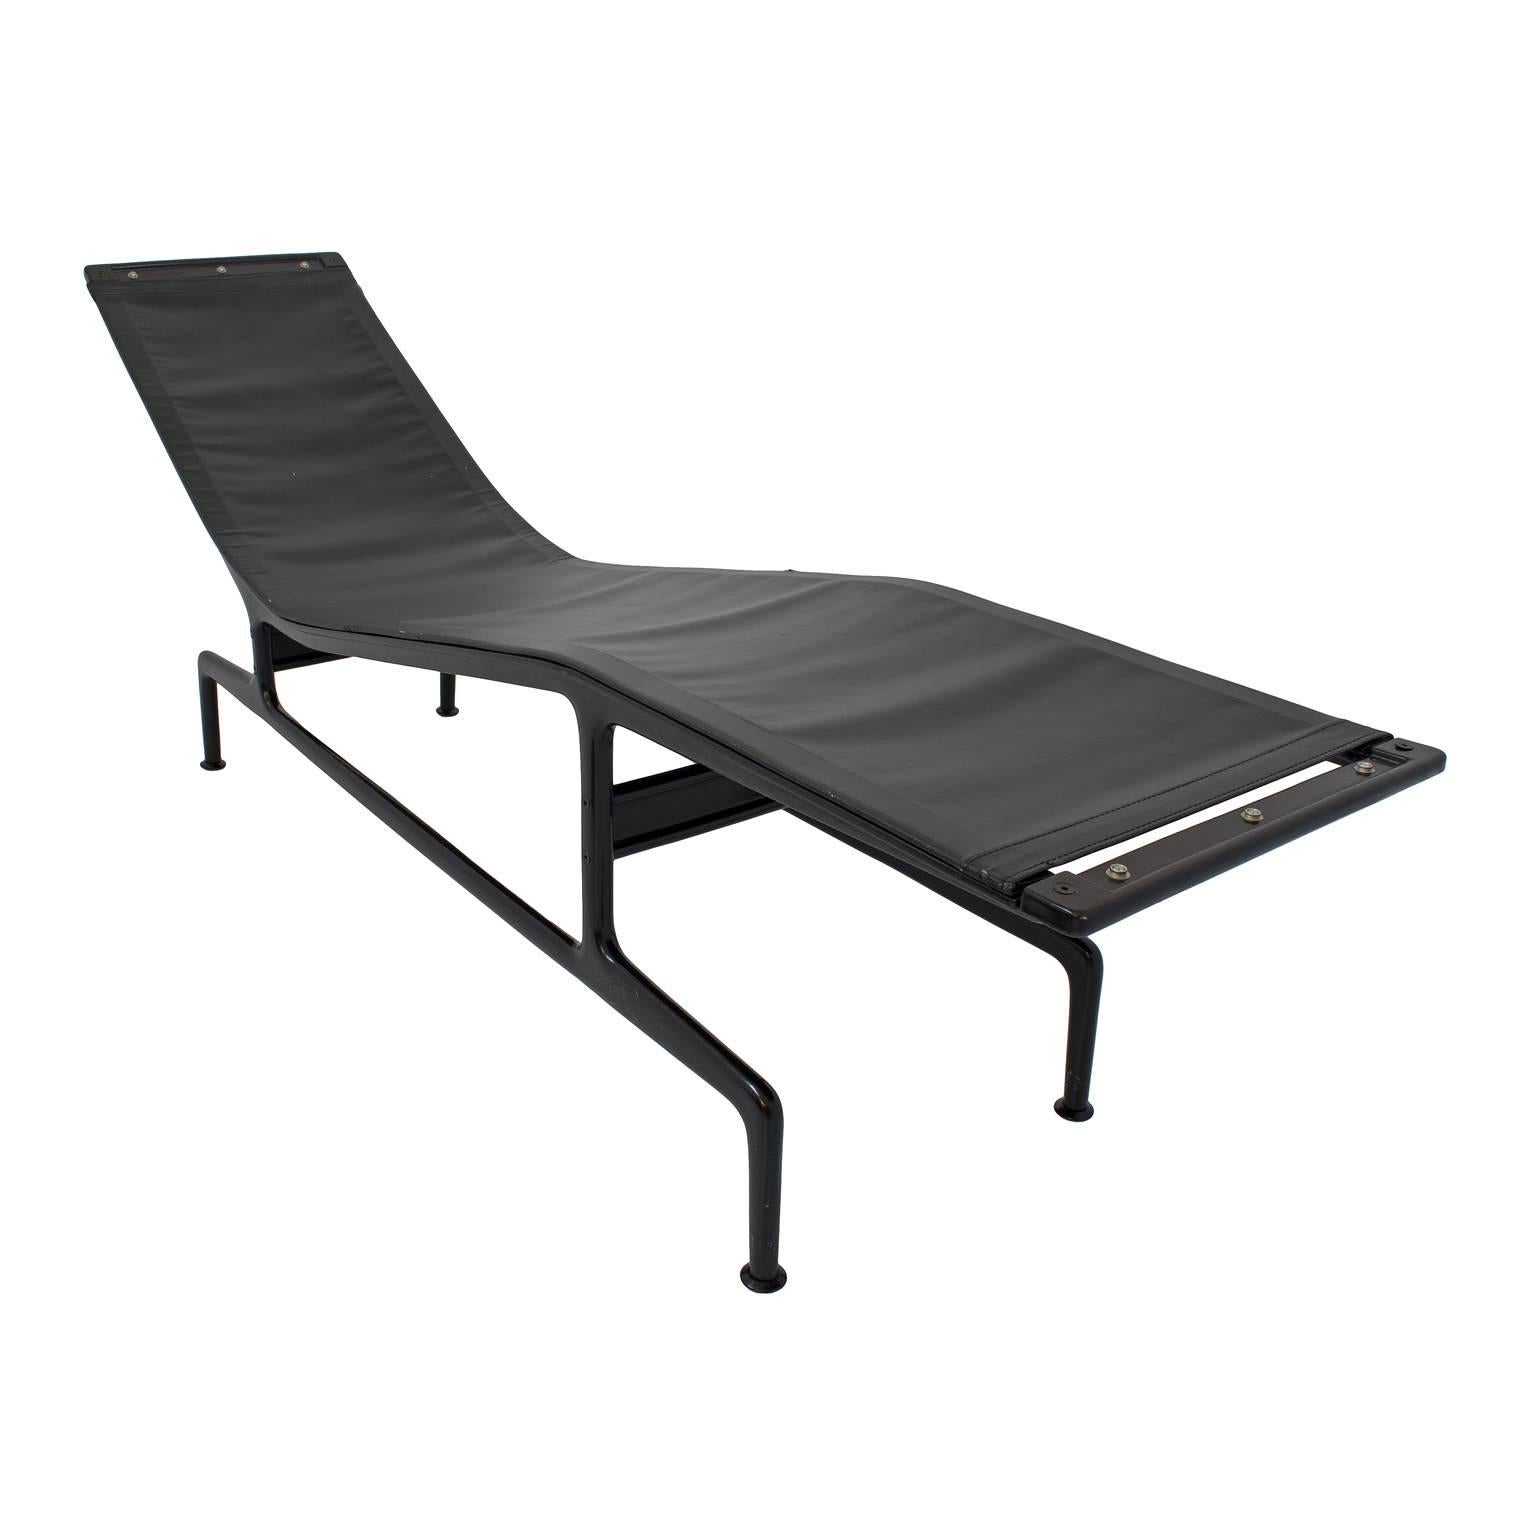 Mid-20th Century Charles Eames for Herman Miller Chaise for Billy Wilder in Black For Sale